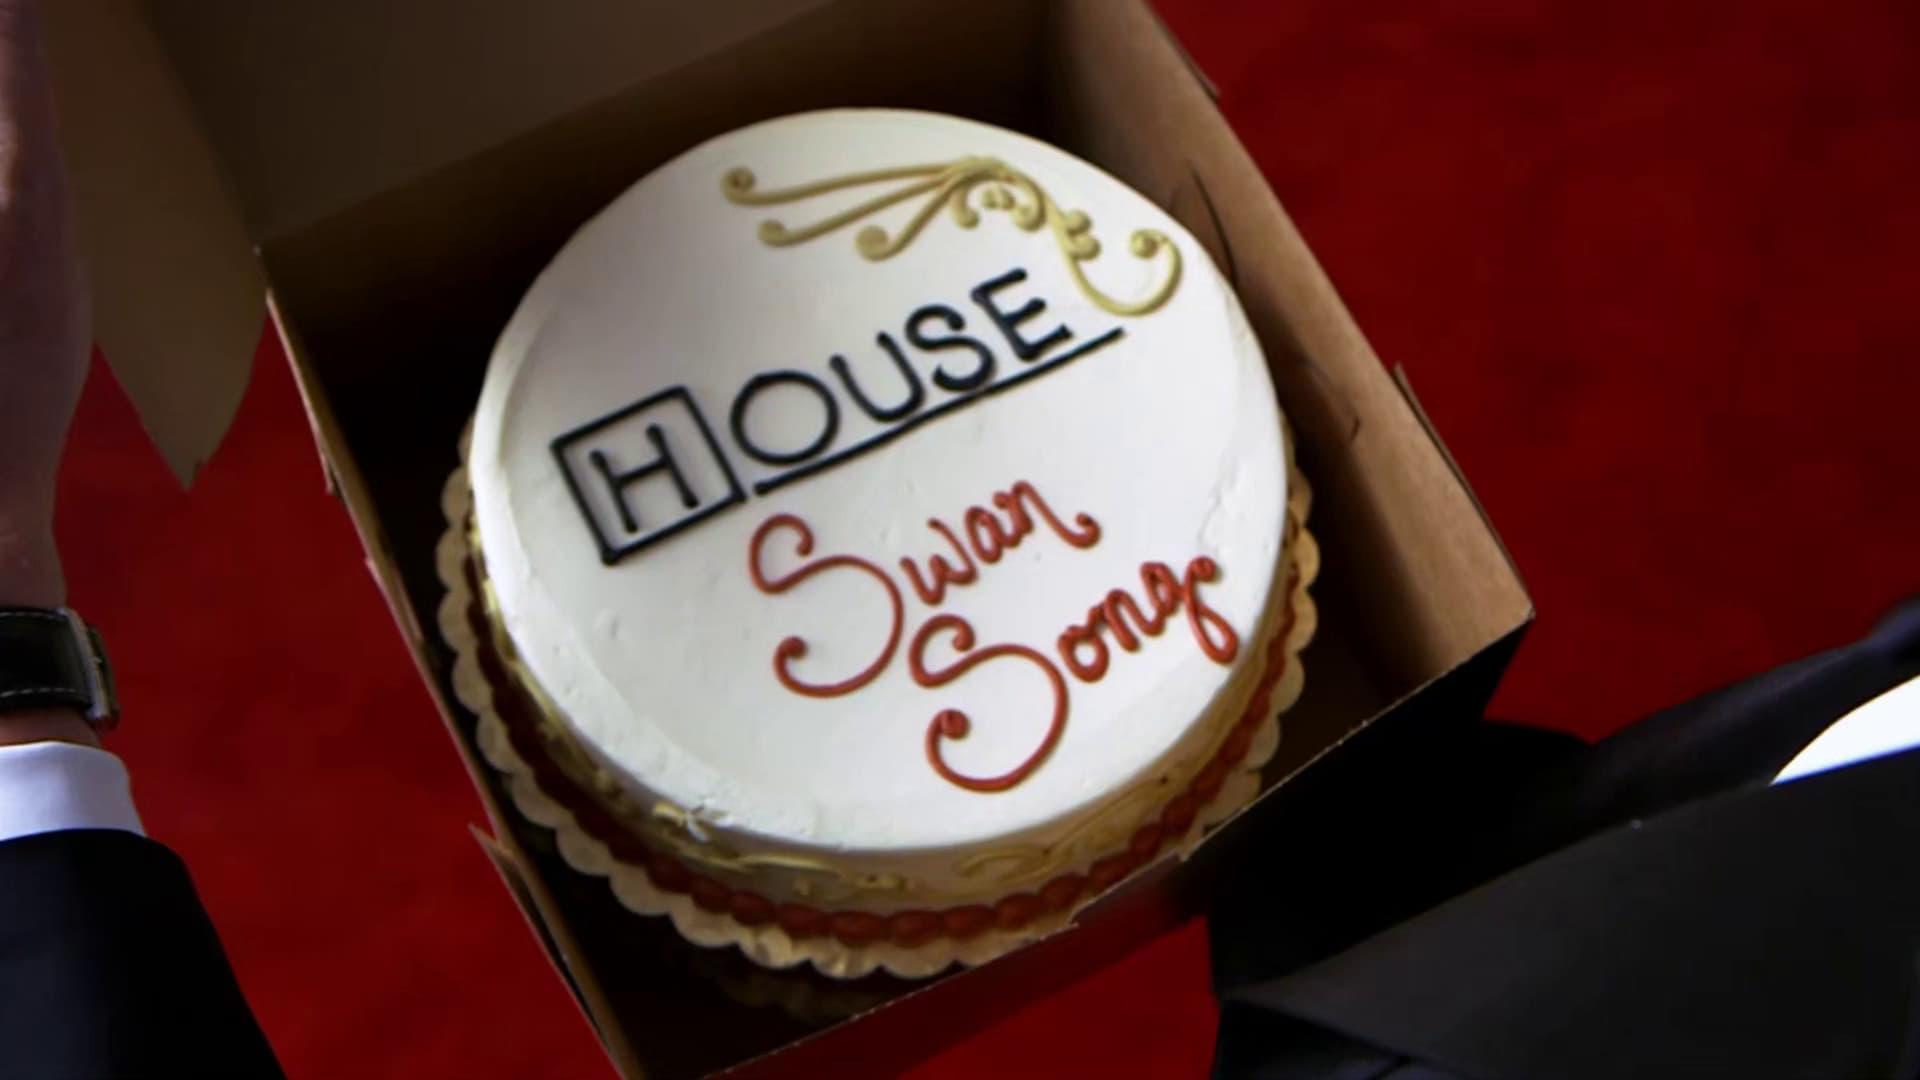 House: Swan Song backdrop